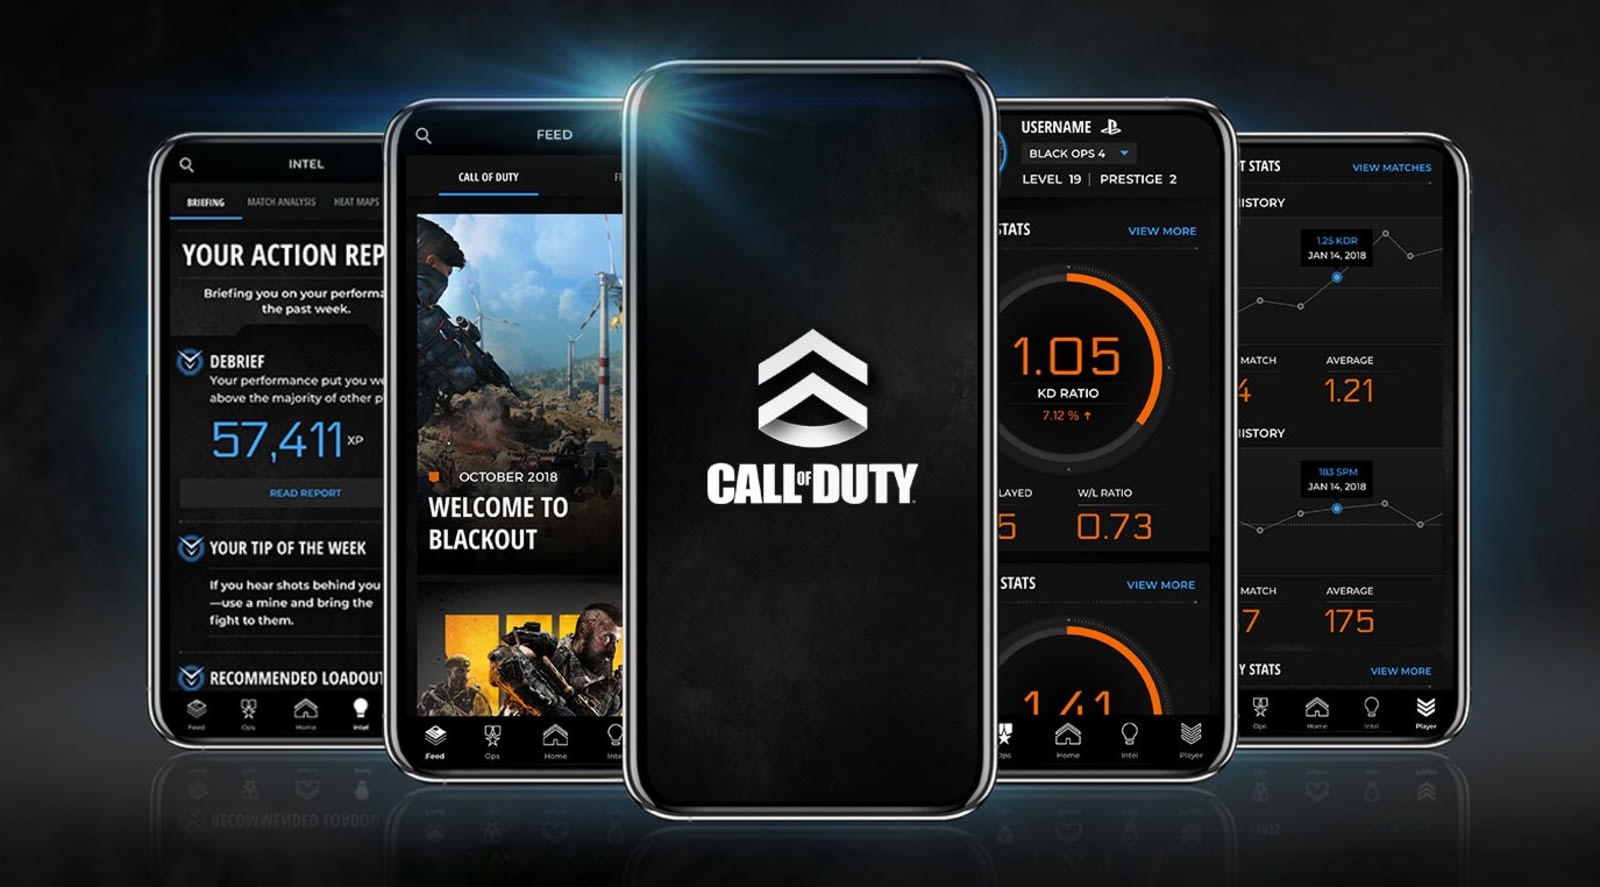 [Free 2020] Free Cod Points & Credits When Will Zombies Be Available On Cod Mobile